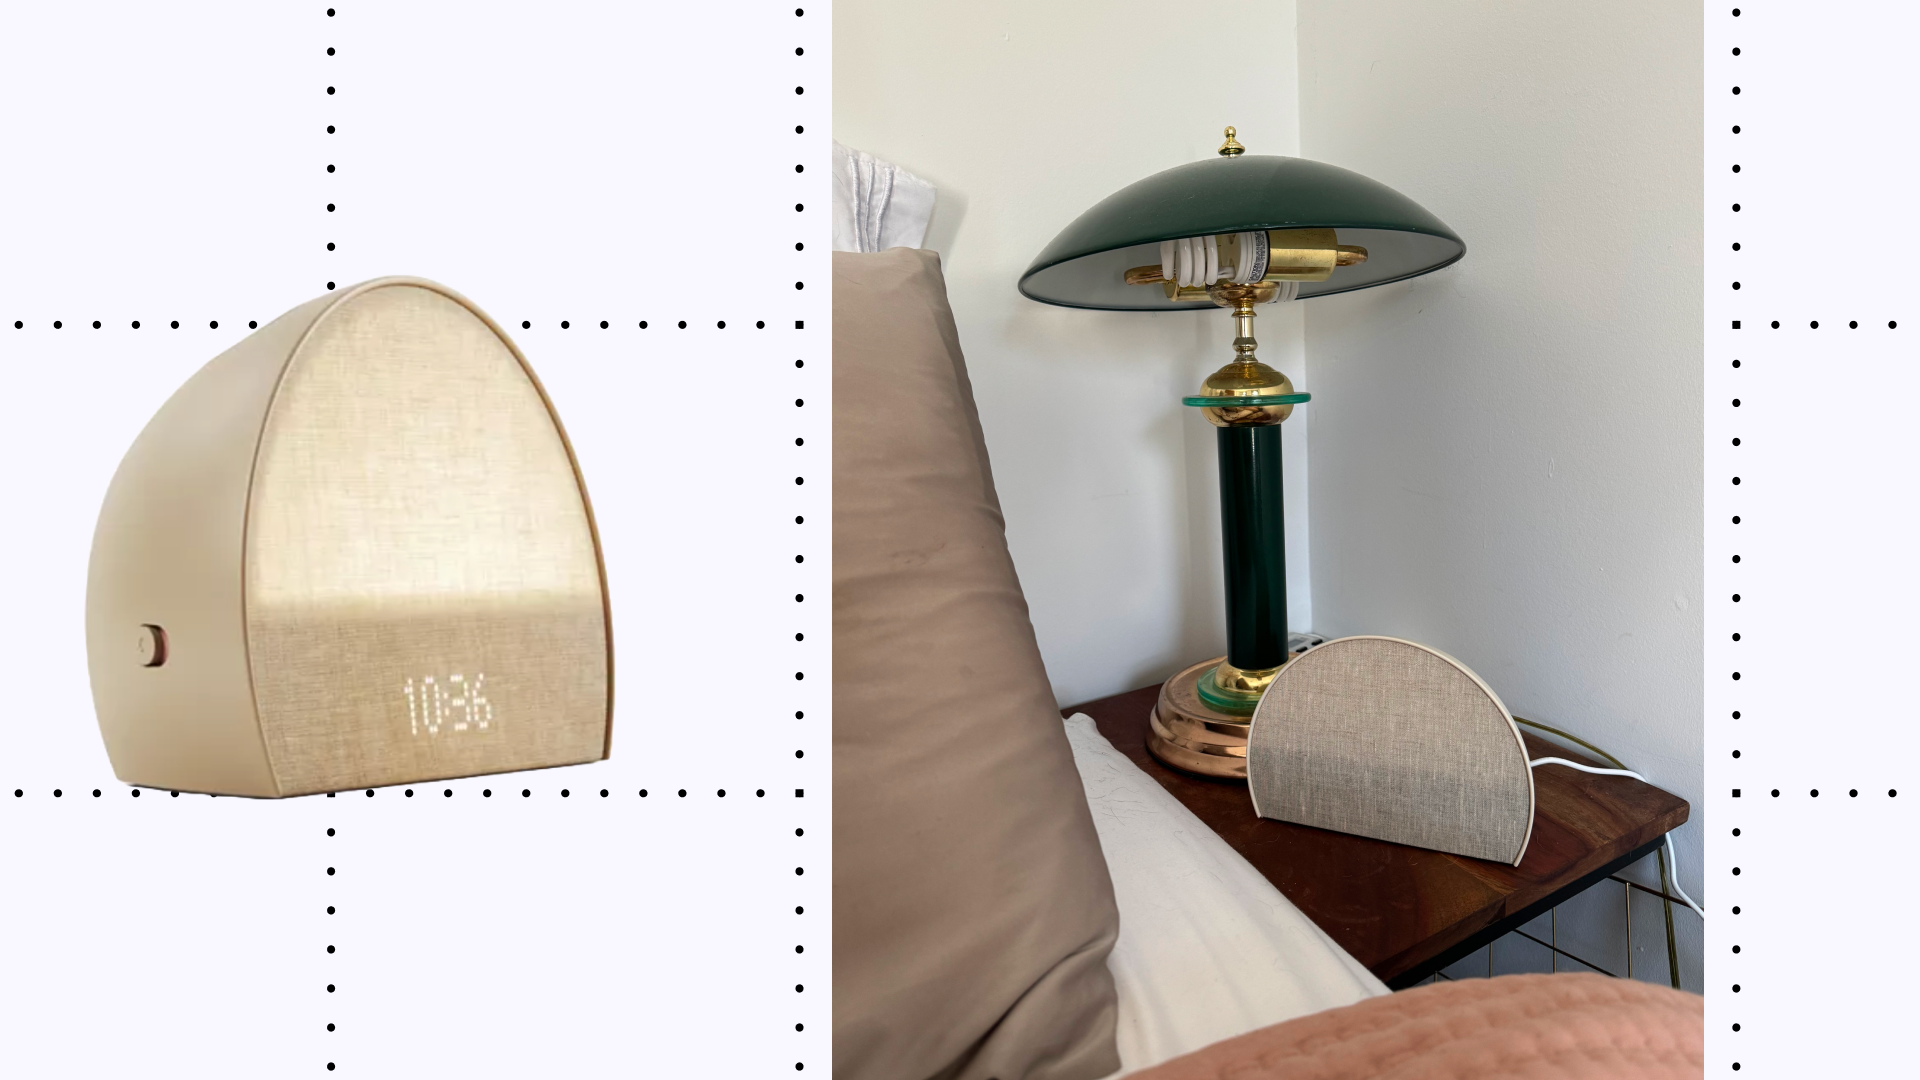 A product photo of the Hatch Restore 2 next to a photo of the Hatch Restore 2 on a nightstand next to a green and gold lamp